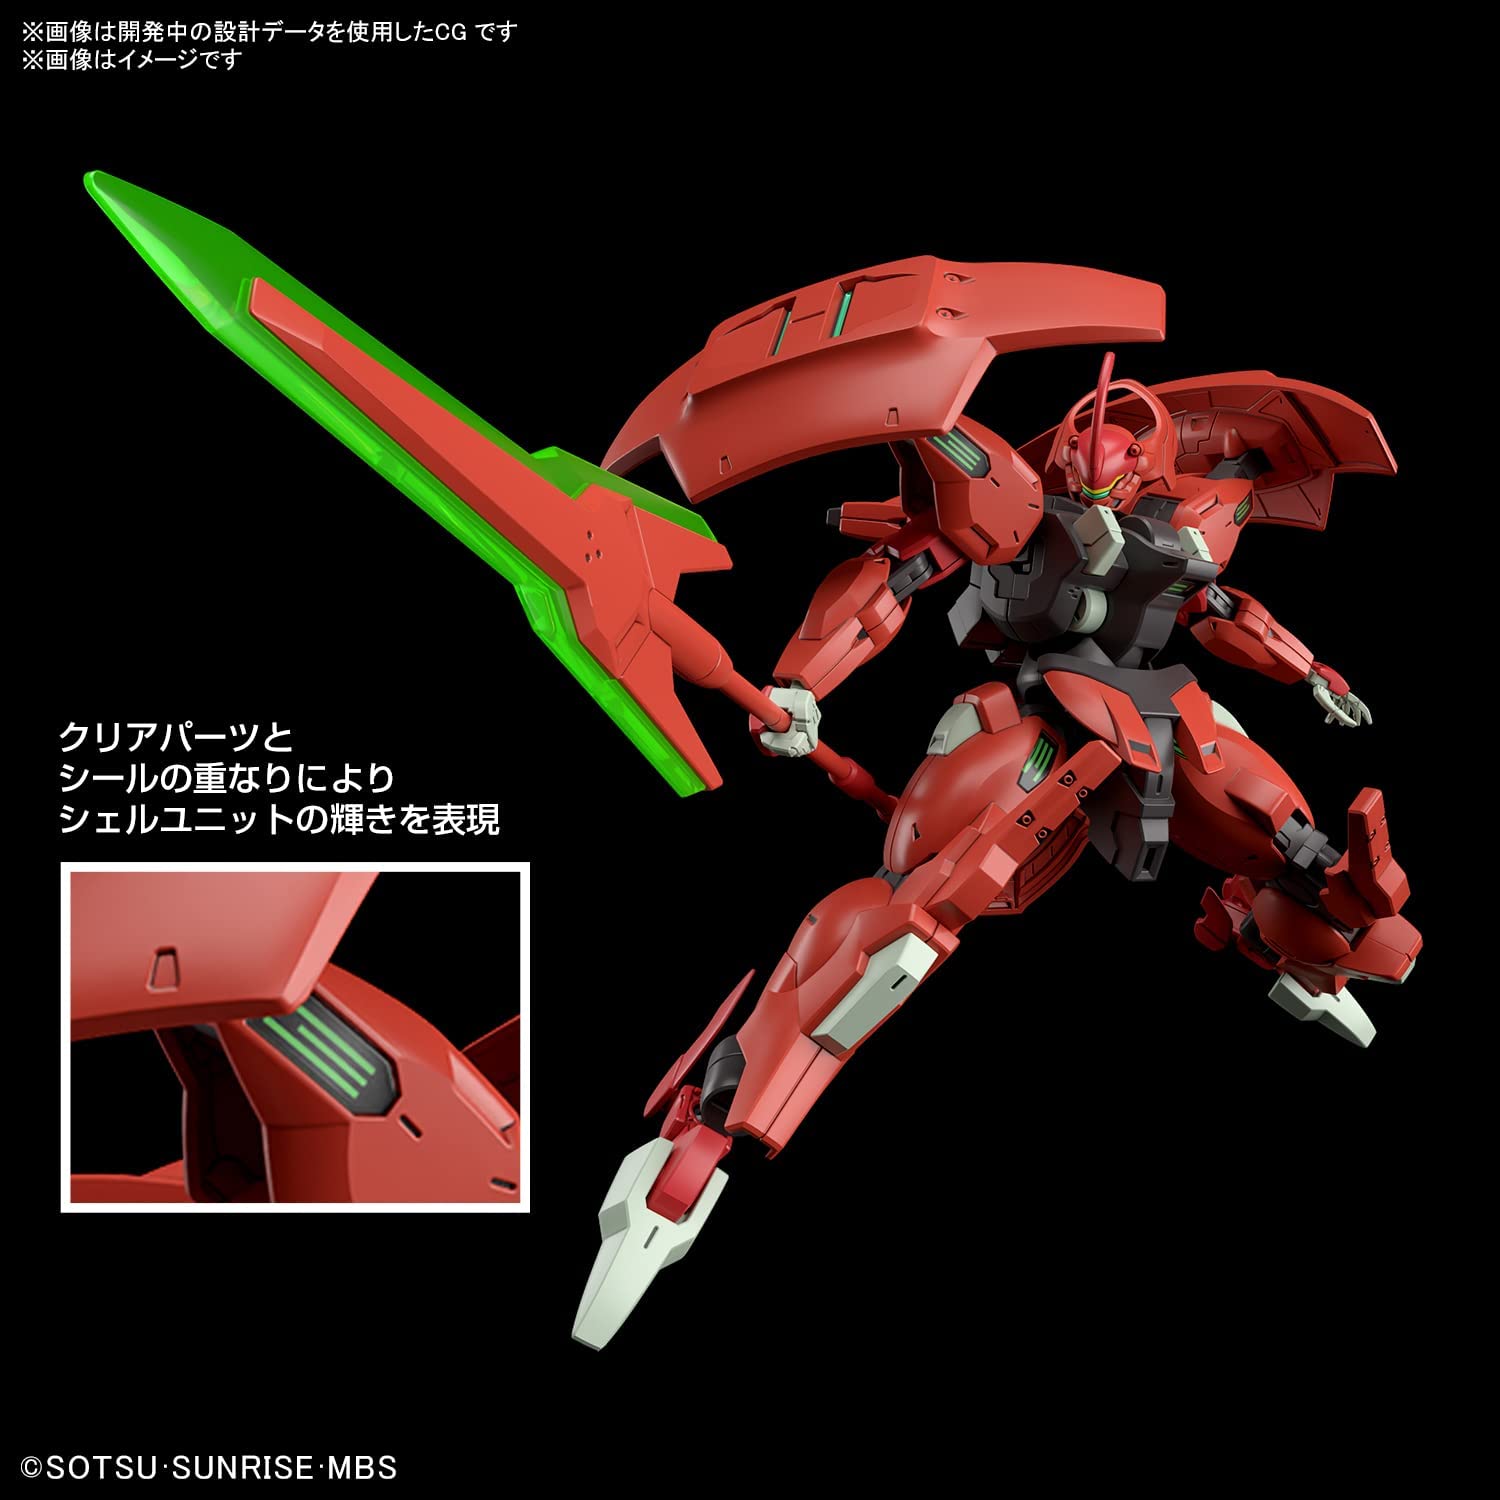 HG Mobile Suit Gundam: Witch of Mercury Daryl Barde 1/144 Scale